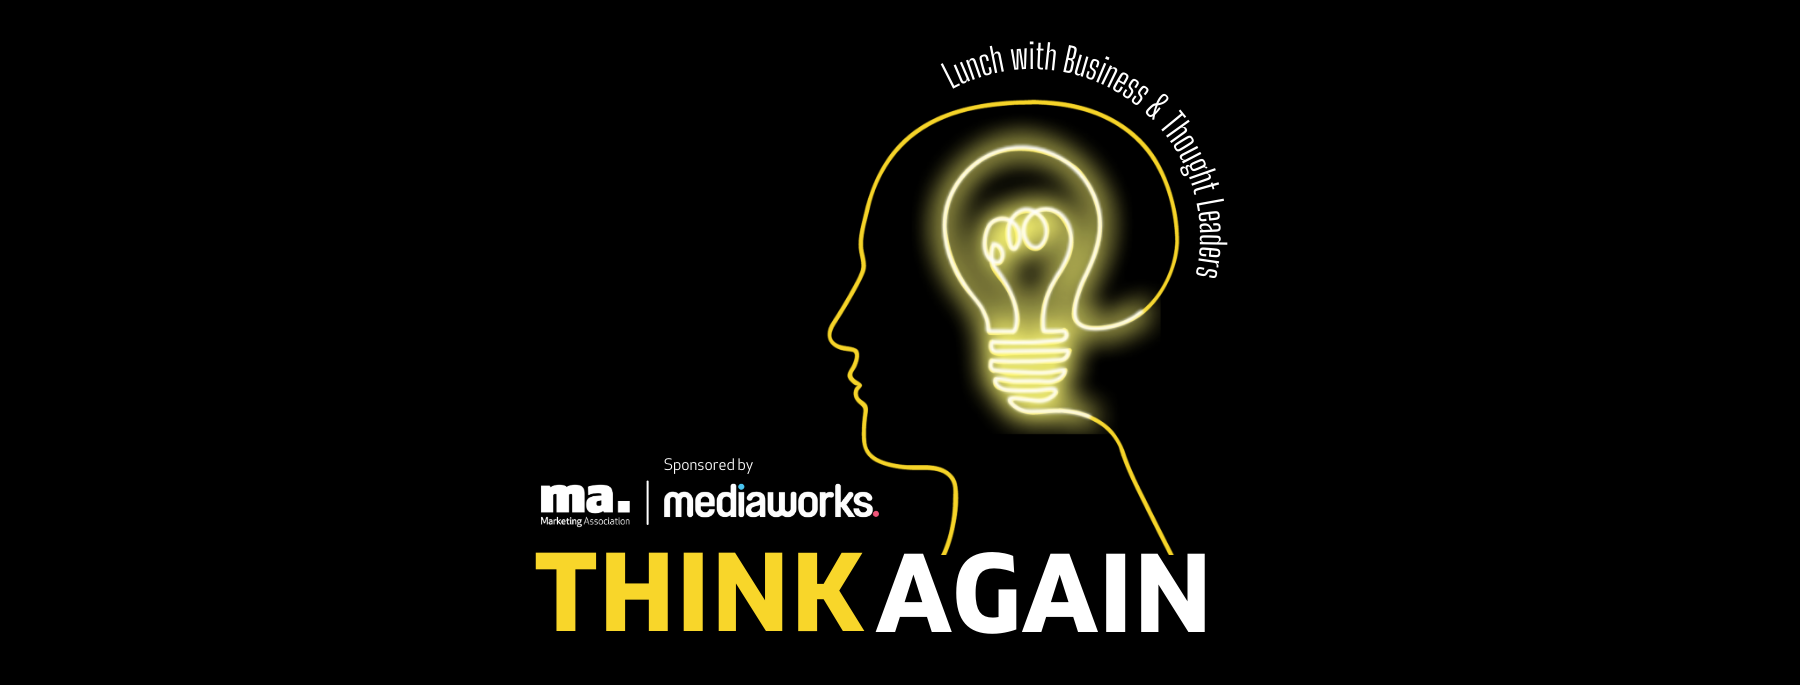 Think Again webpage banner (1800 x 685 px)